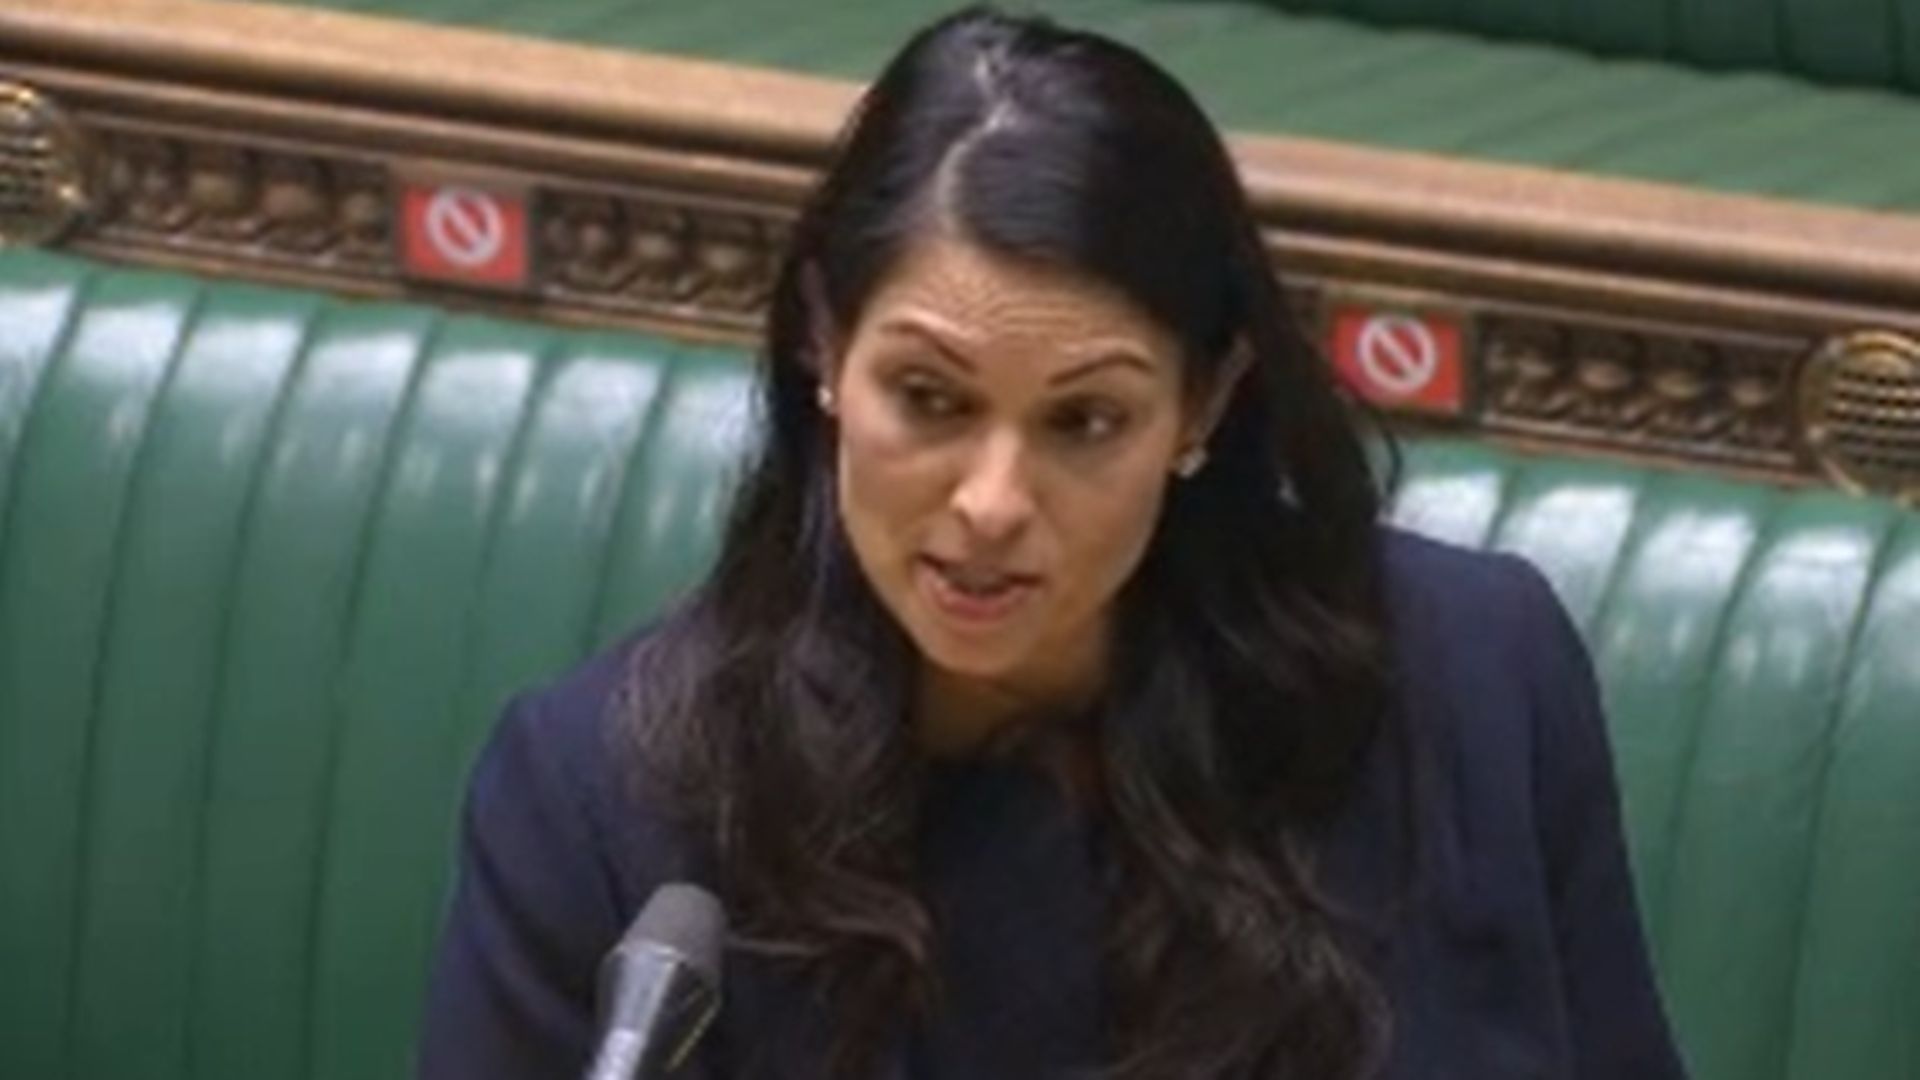 Priti Patel in the House of Commons - Credit: Parliament Live